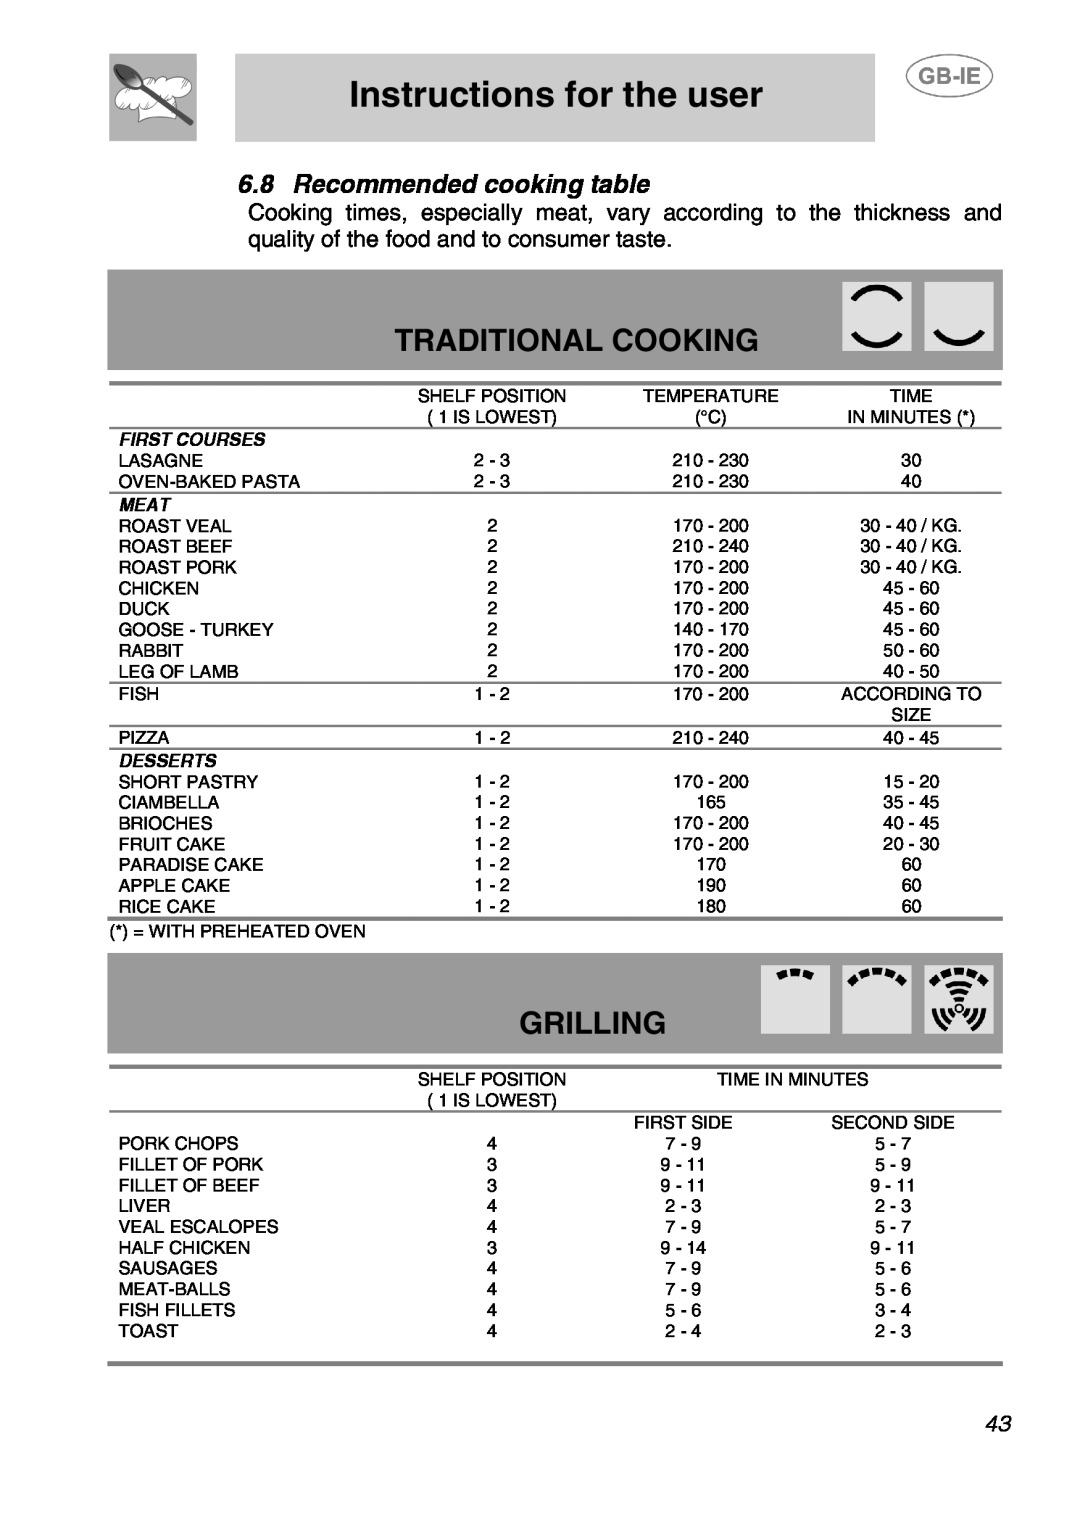 Smeg AP320EB Traditional Cooking, Grilling, Recommended cooking table, Instructions for the user, First Courses, Meat 